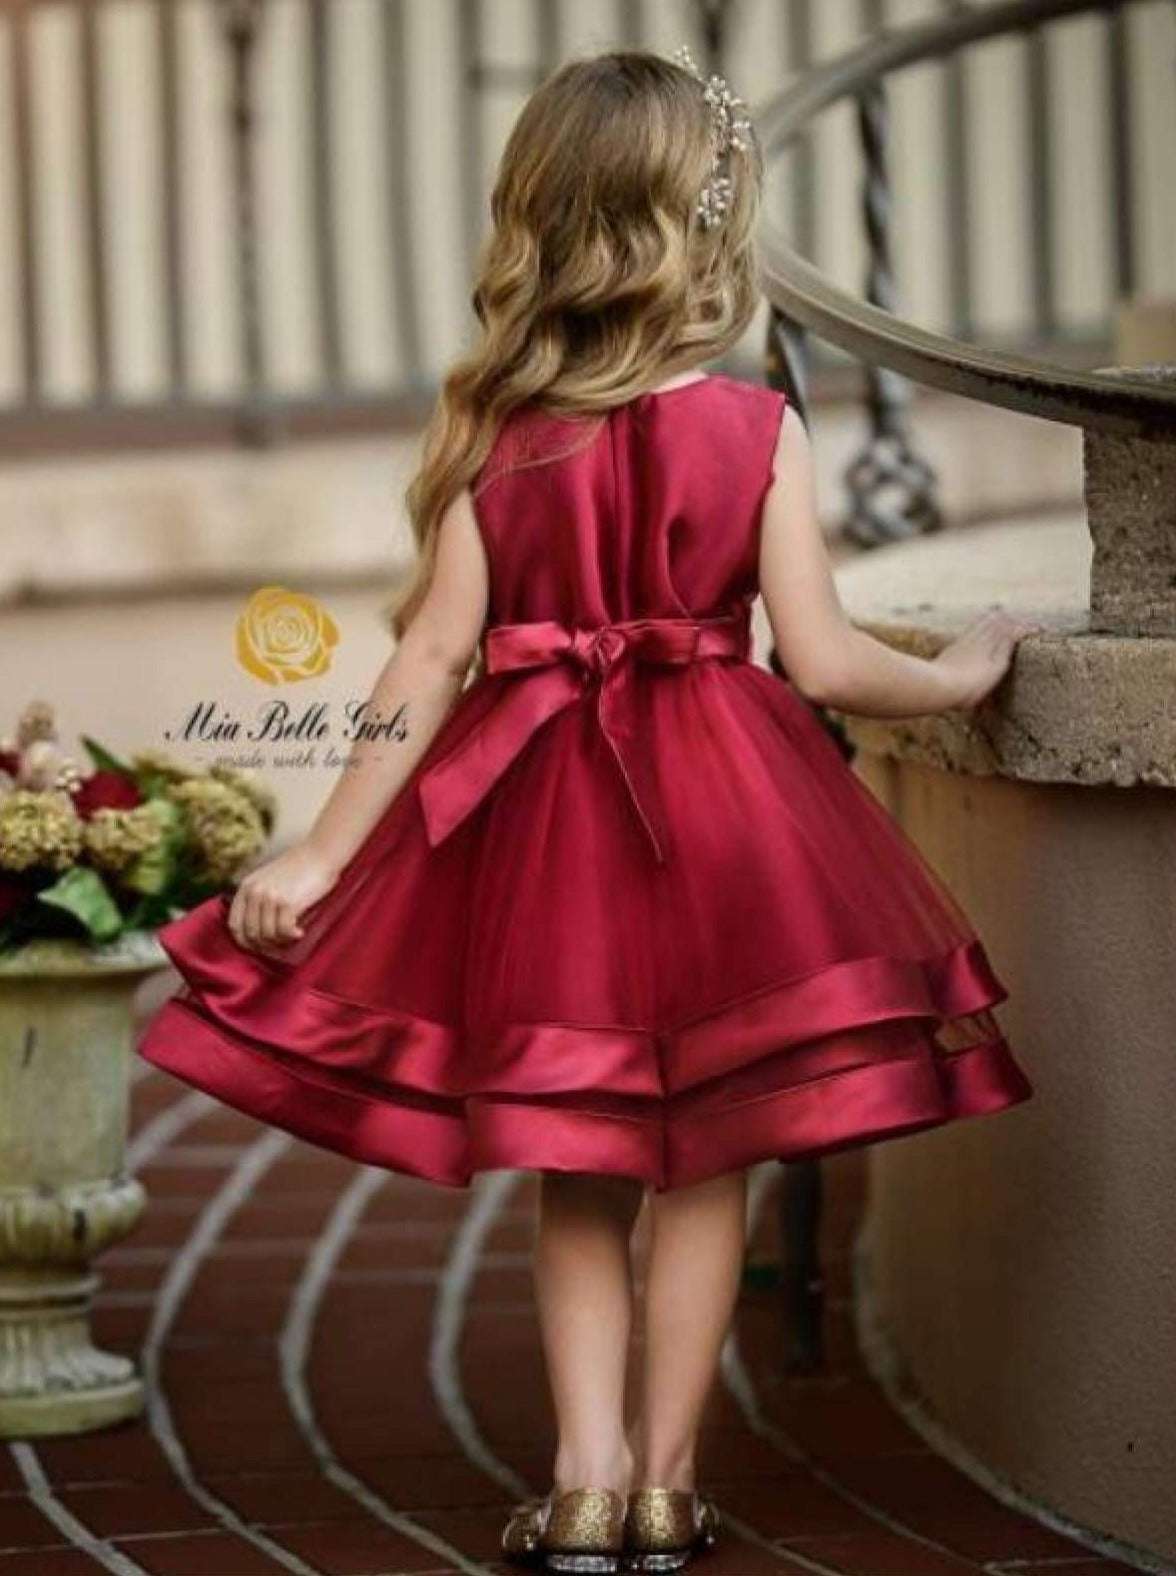 Girls Special Occasion Dress | Pearl Embellished Layered Satin Dress